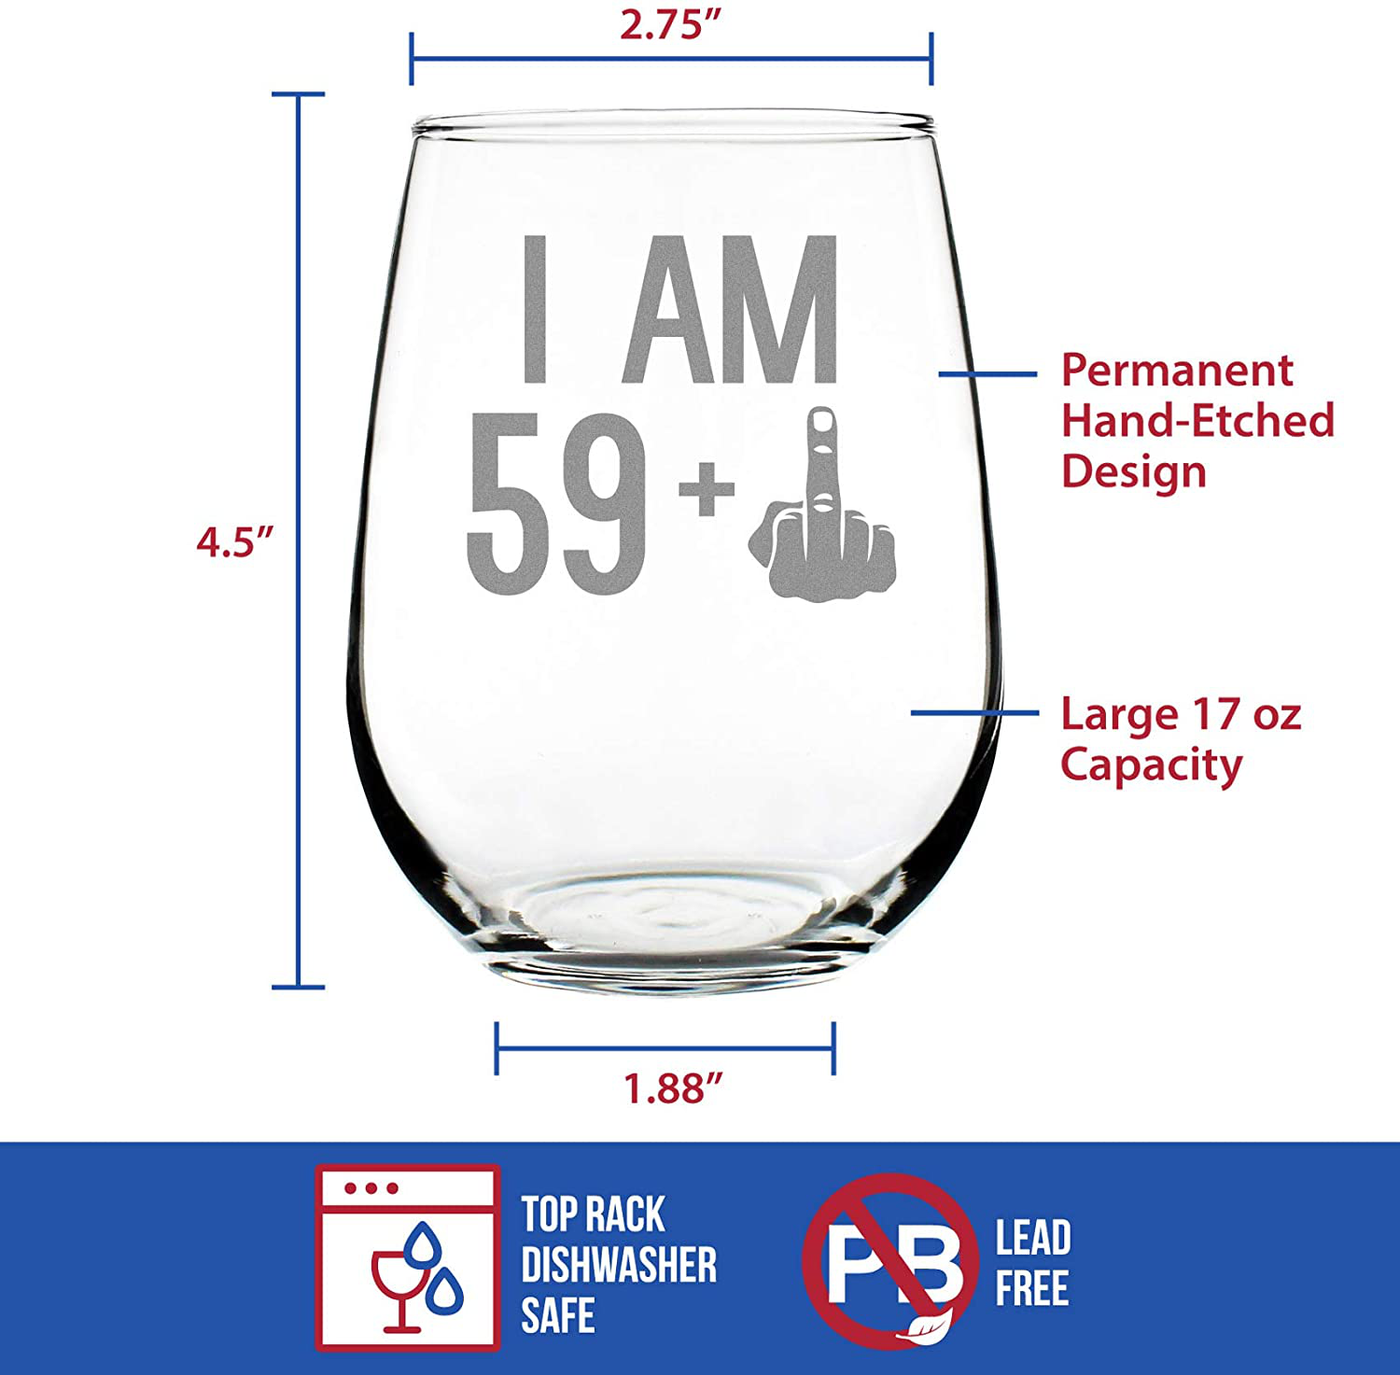 59 + 1 Middle Finger - 60th Birthday Stemless Wine Glass for Women & Men - Cute Funny Wine Gift Idea - Unique Personalized Bday Glasses for Best Friend Turning 60 - Drinking Party Decoration